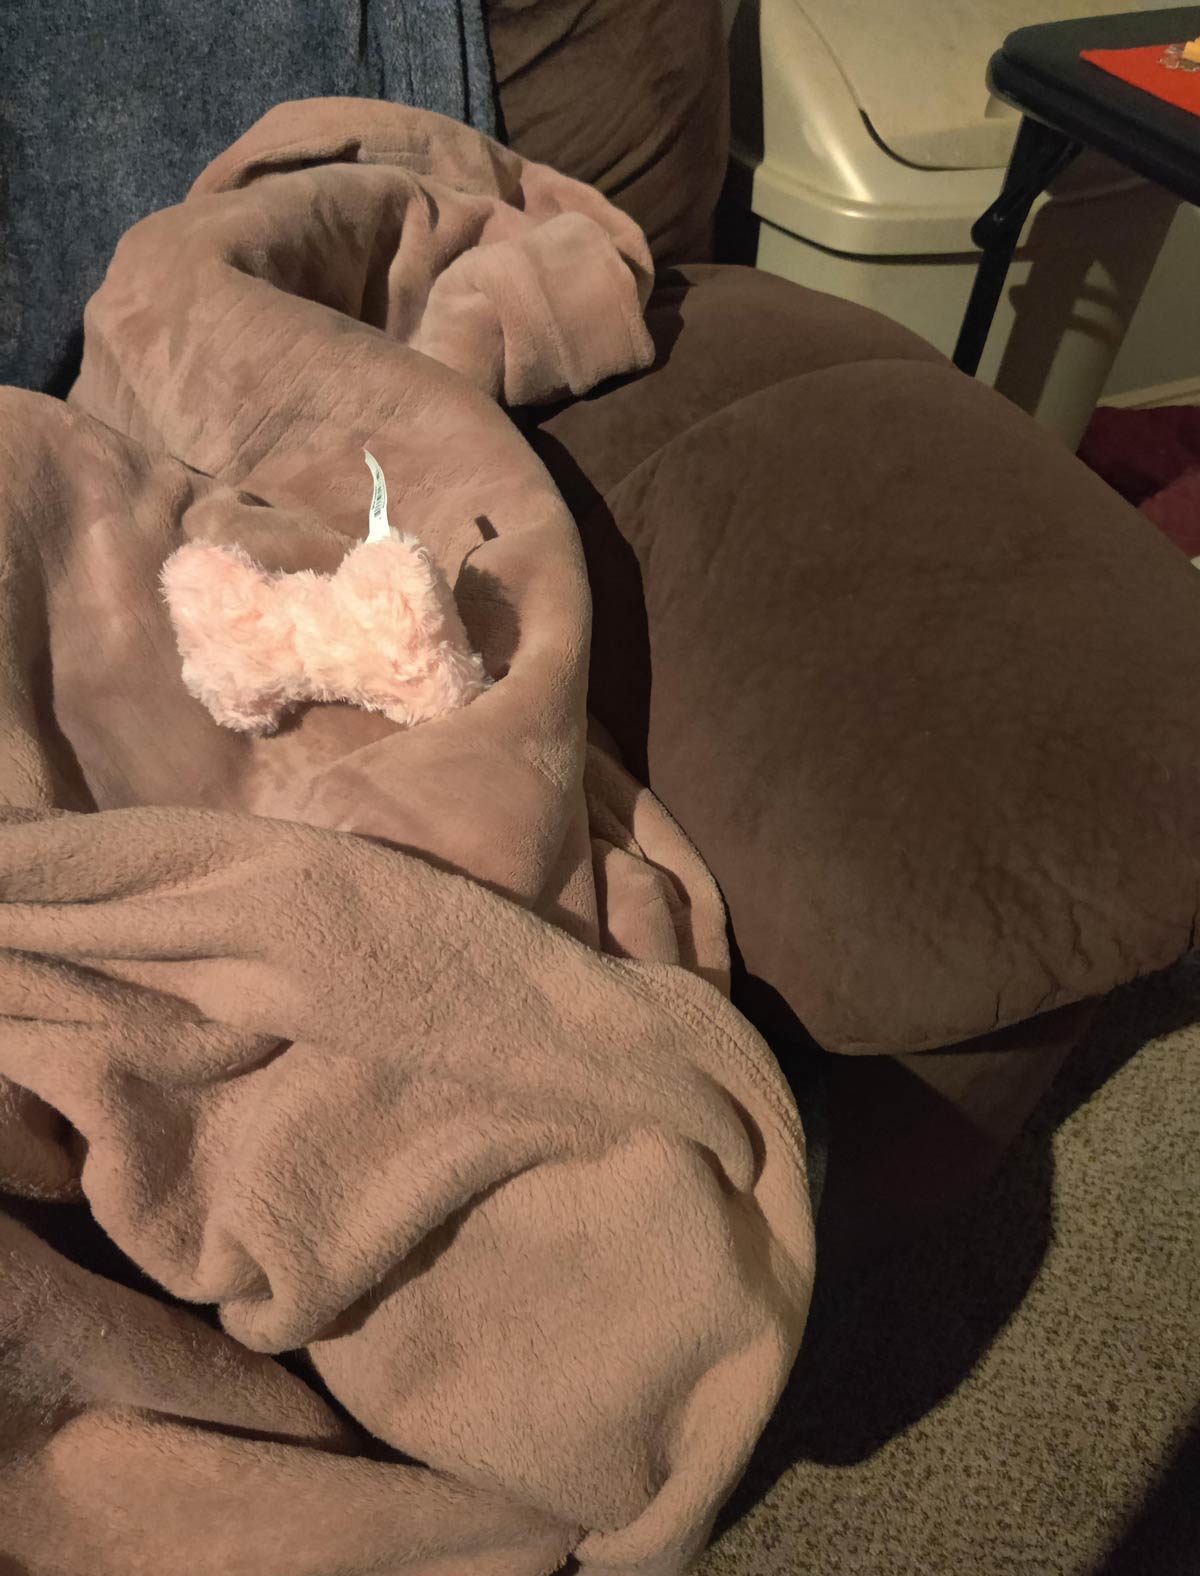 Is this blanket pink or brown? My wife and I have been debating this for 10 minutes